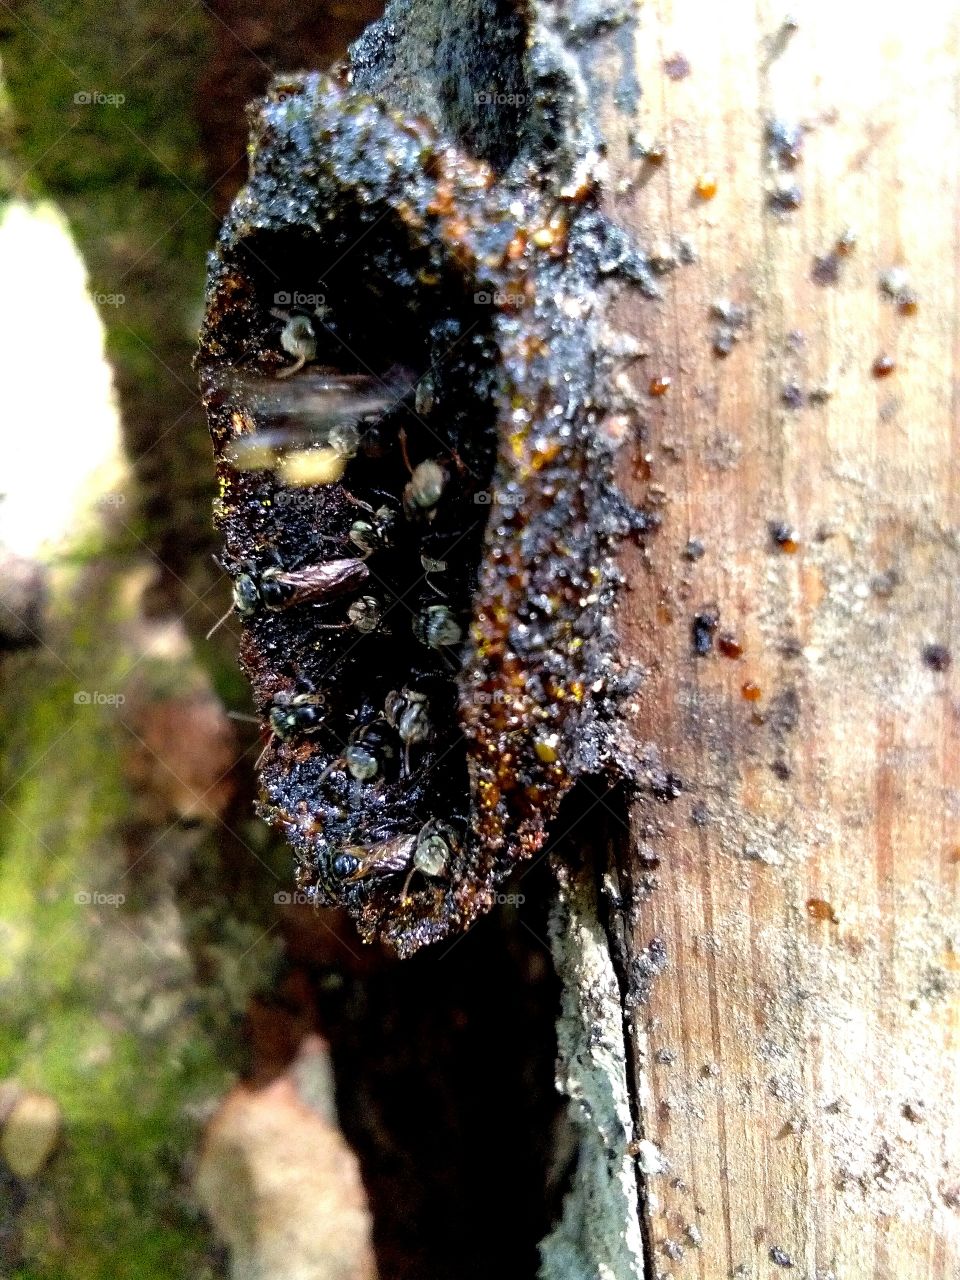 Stingless bees, sometimes called stingless honey bees or simply meliponines, are a large group of bees, comprising the tribe Meliponini.Stingless bees have been shown to be valuable pollinators of crops such as macadamias and mangos